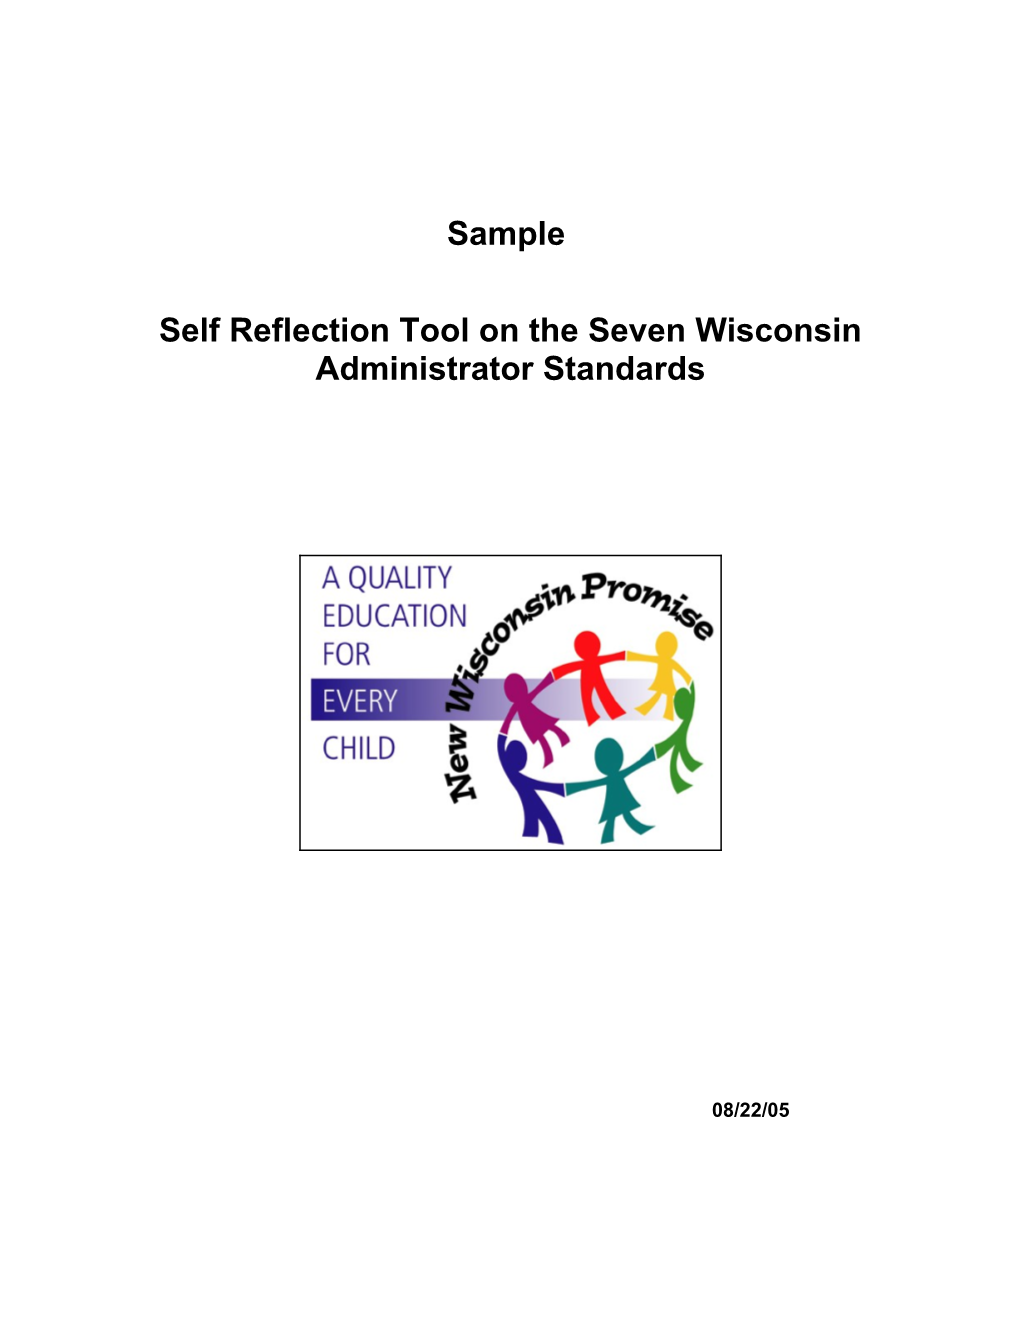 Self Reflection PDP Tool for Administrators